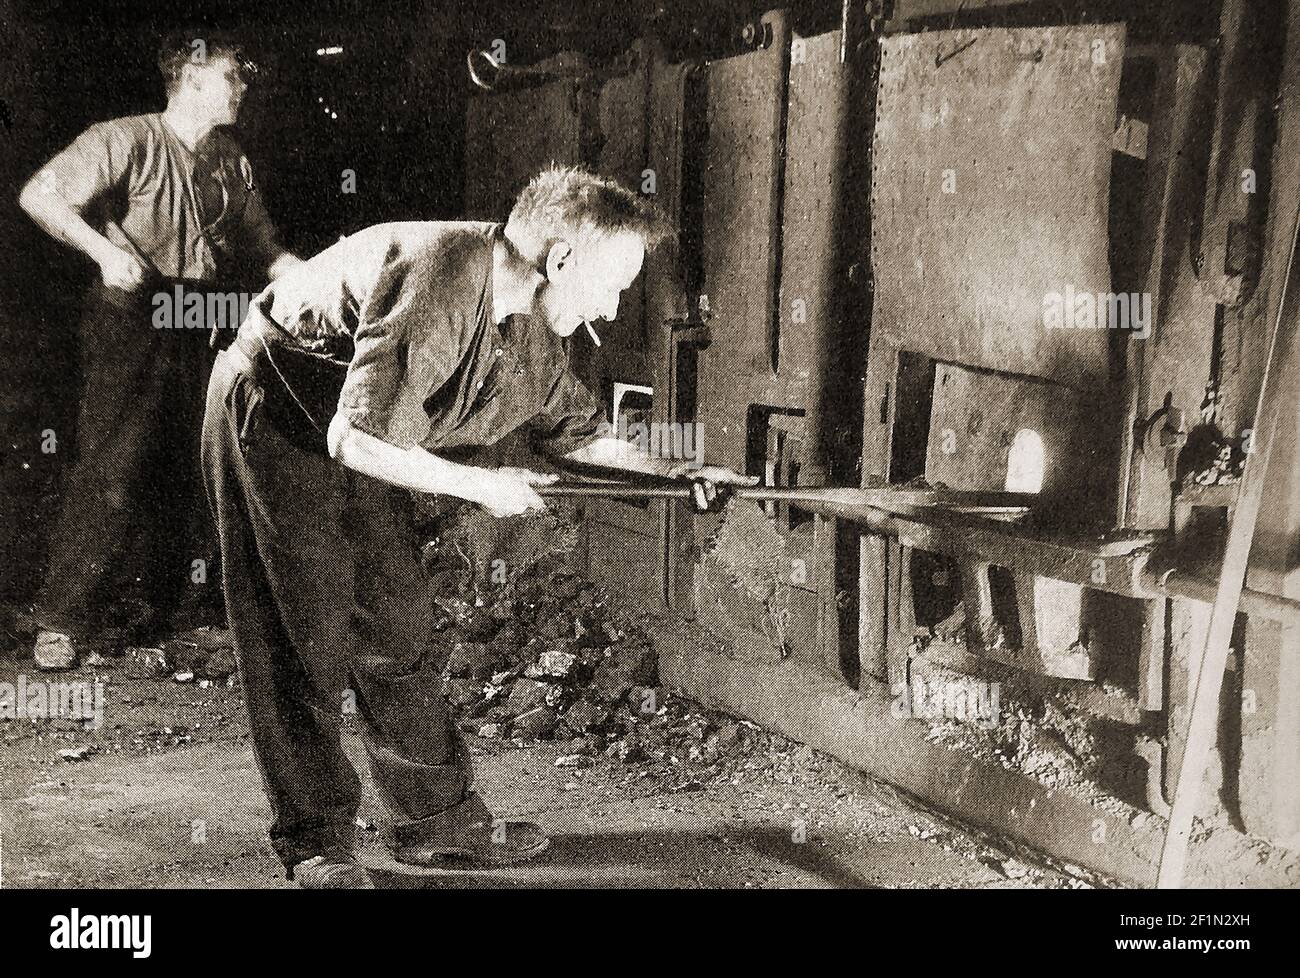 A circa 1930s image of a man puddling iron in a British iron foundry.  The procdess of Puddling is a step in the manufacture of high-grade iron using a crucible or furnace,   invented in Great Britain during the Industrial Revolution.   Bar iron  could be produced without without charcoal and replaced the earlier potting & stamping,charcoal use and  bloomery processes. Stock Photo